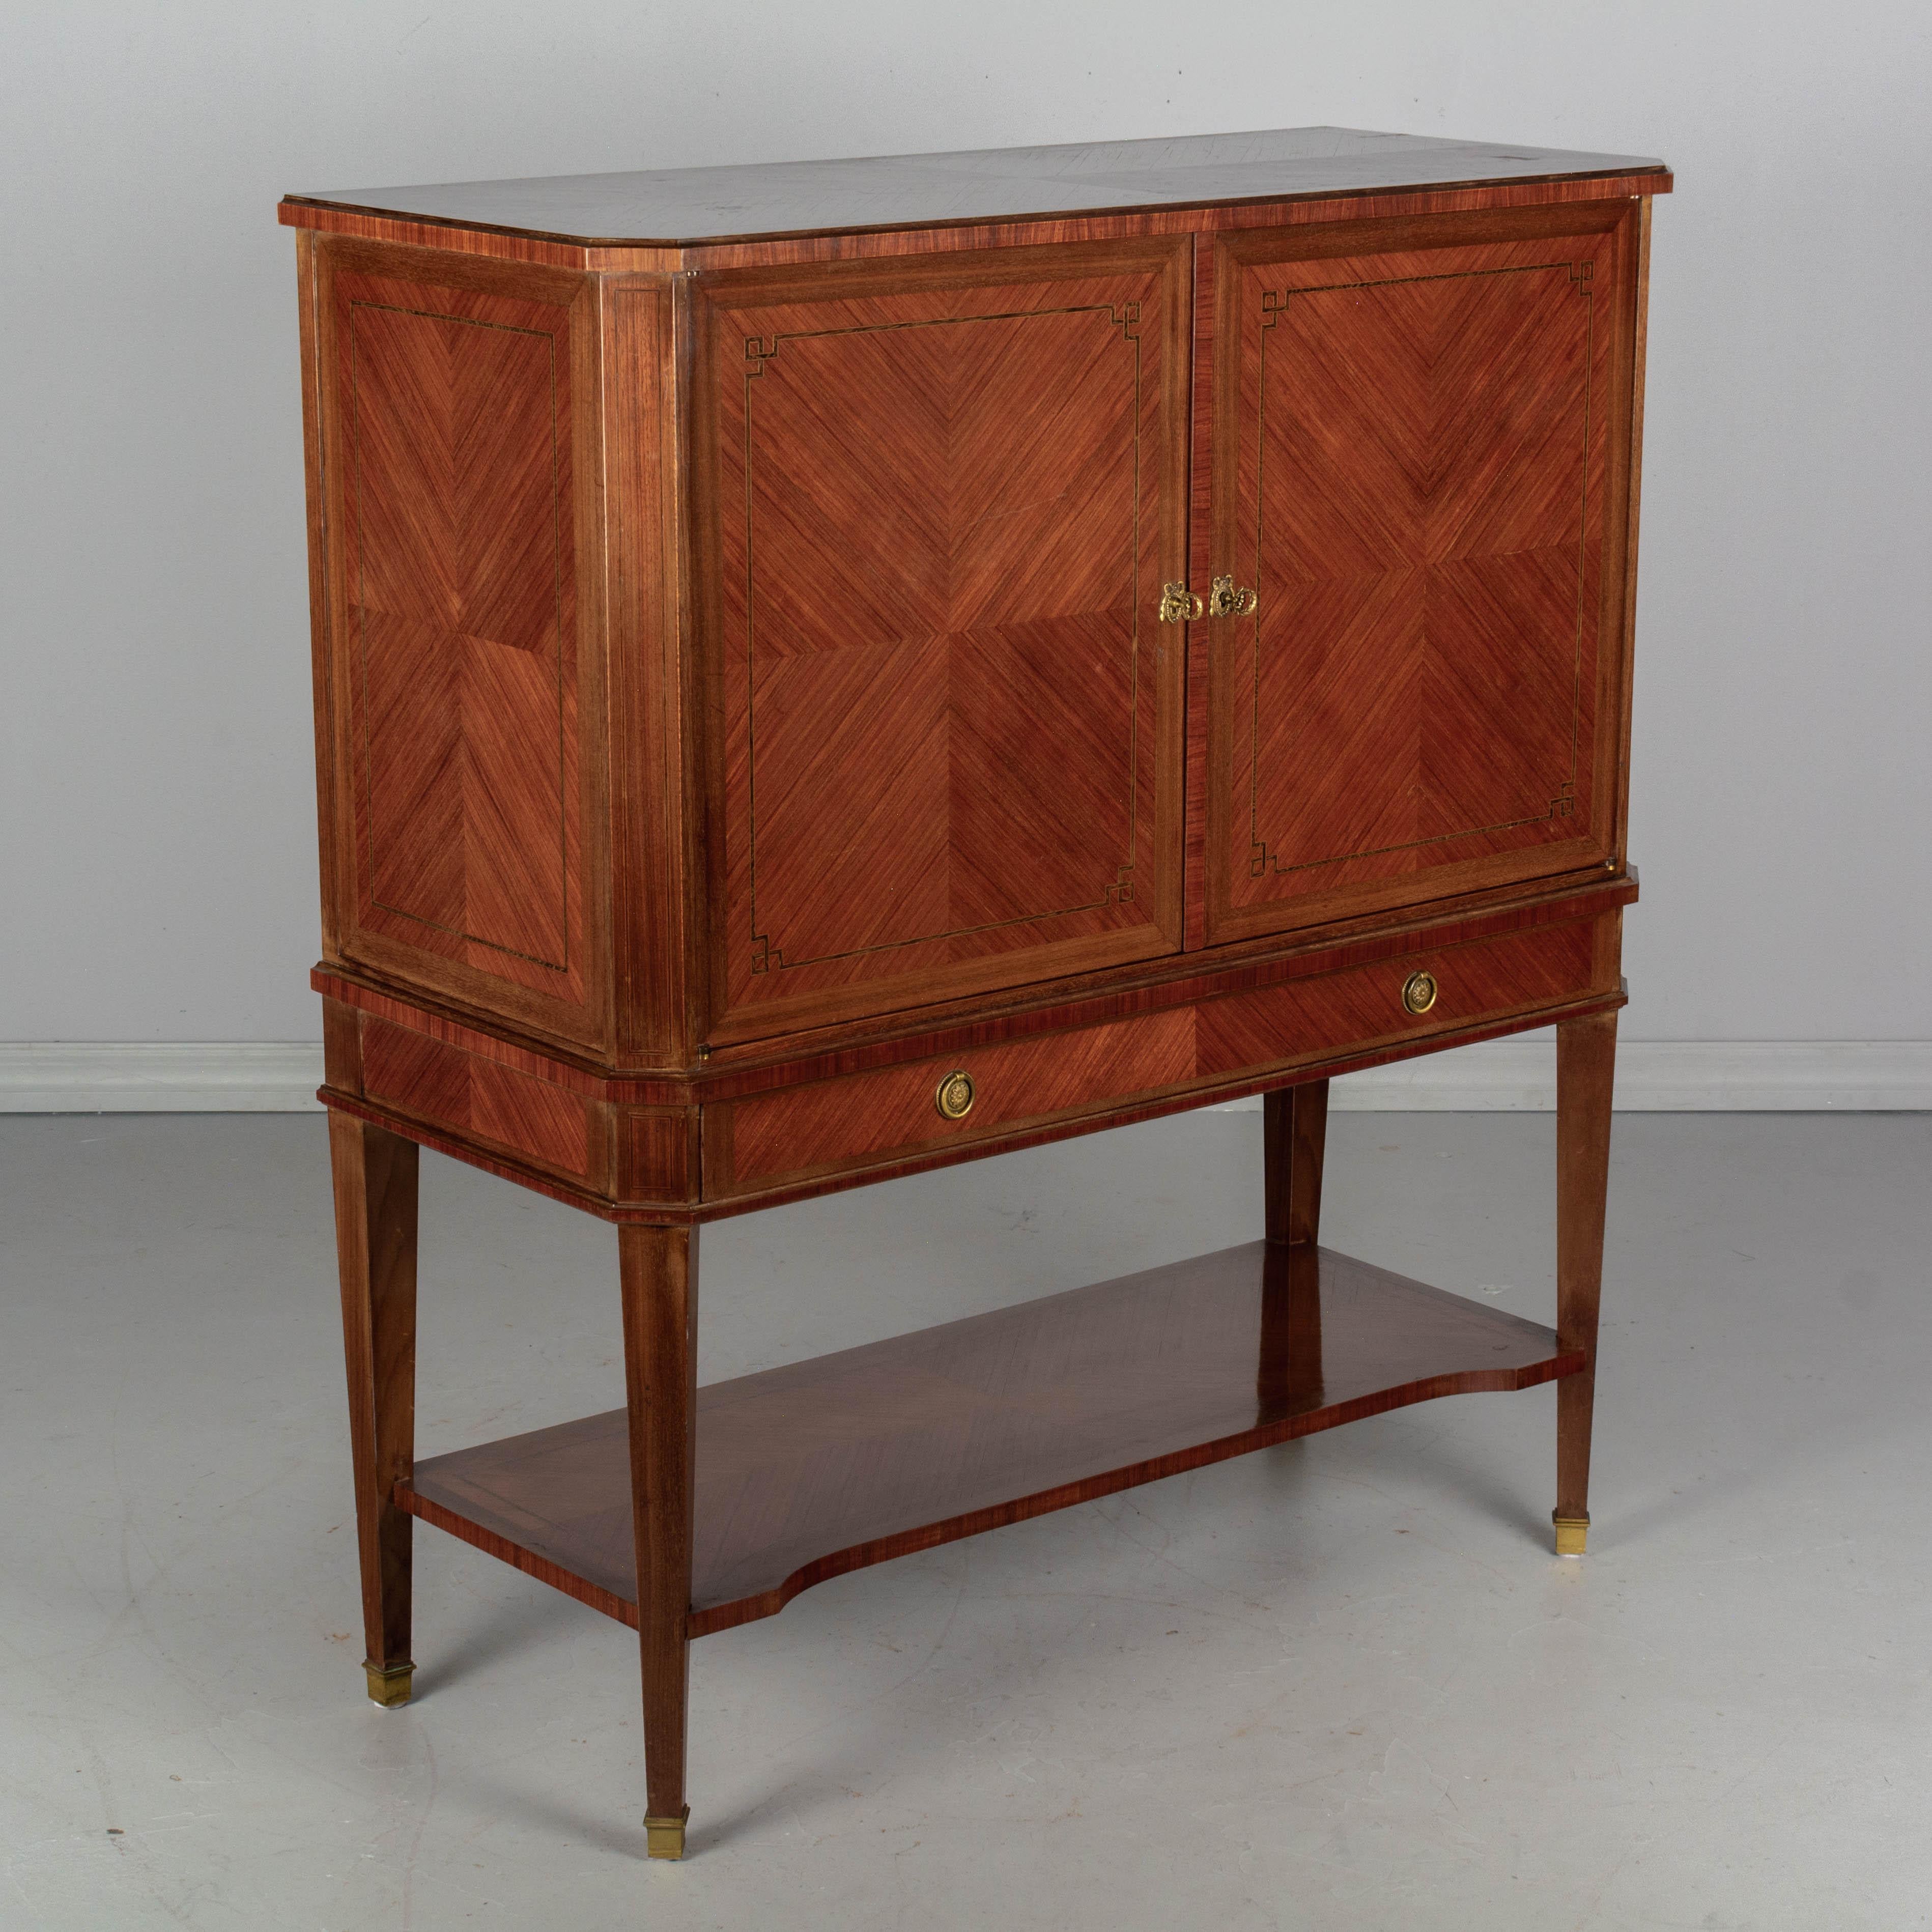 A large Louis XVI style French mahogany and rosewood bar cabinet, or buffet, with bookmatched veneers and marquetry inlay trim. Front doors with working locks and two keys. Interior has a removable shelf and provides ample storage for bottles and